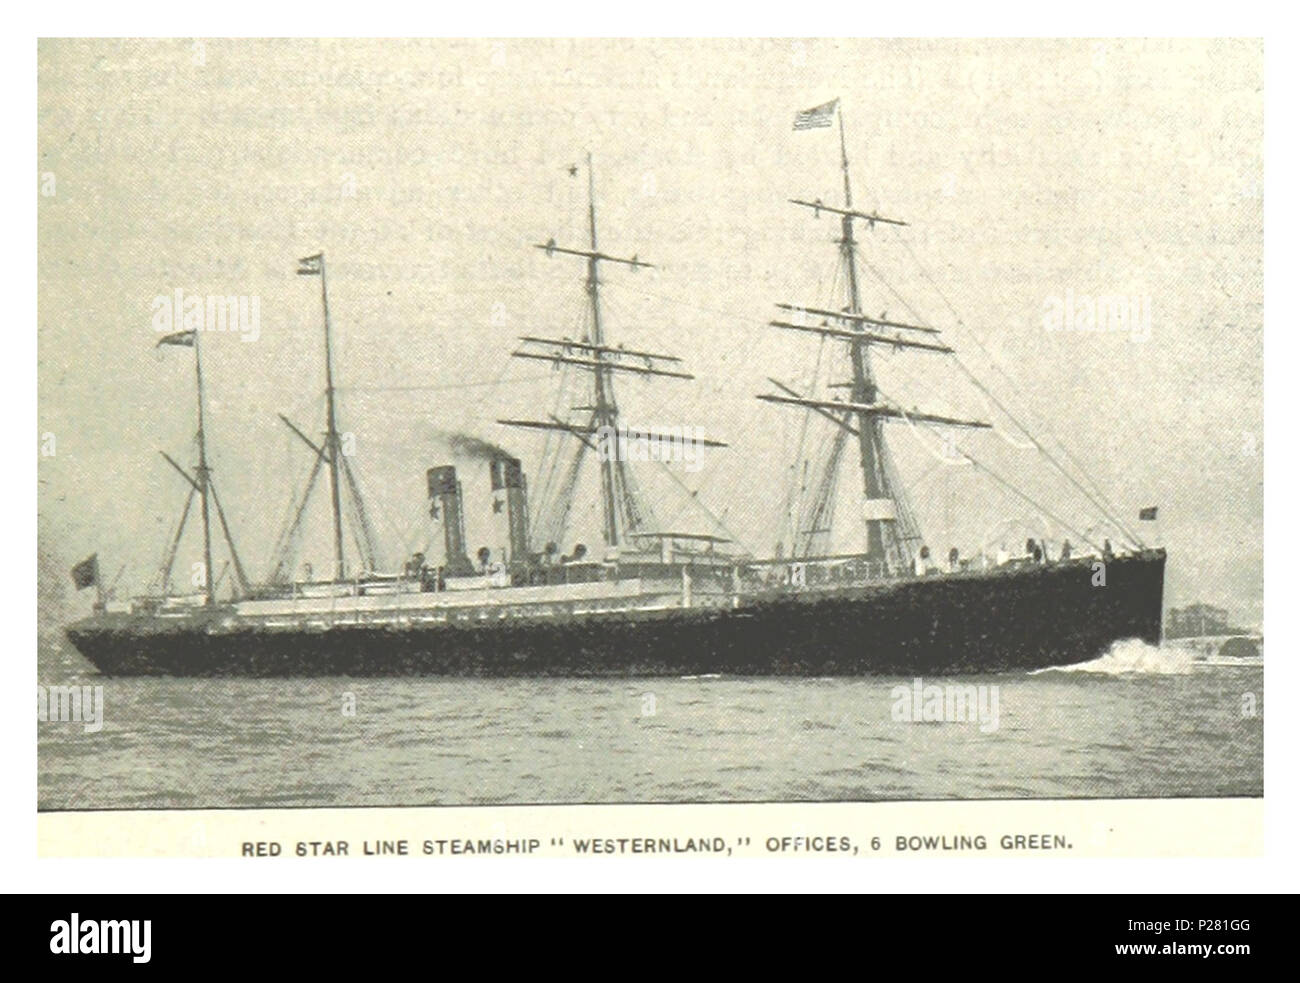 (Re1893NYC) PG095 RED STAR LINE STEAMSHIP WESTERNLAND. Foto Stock